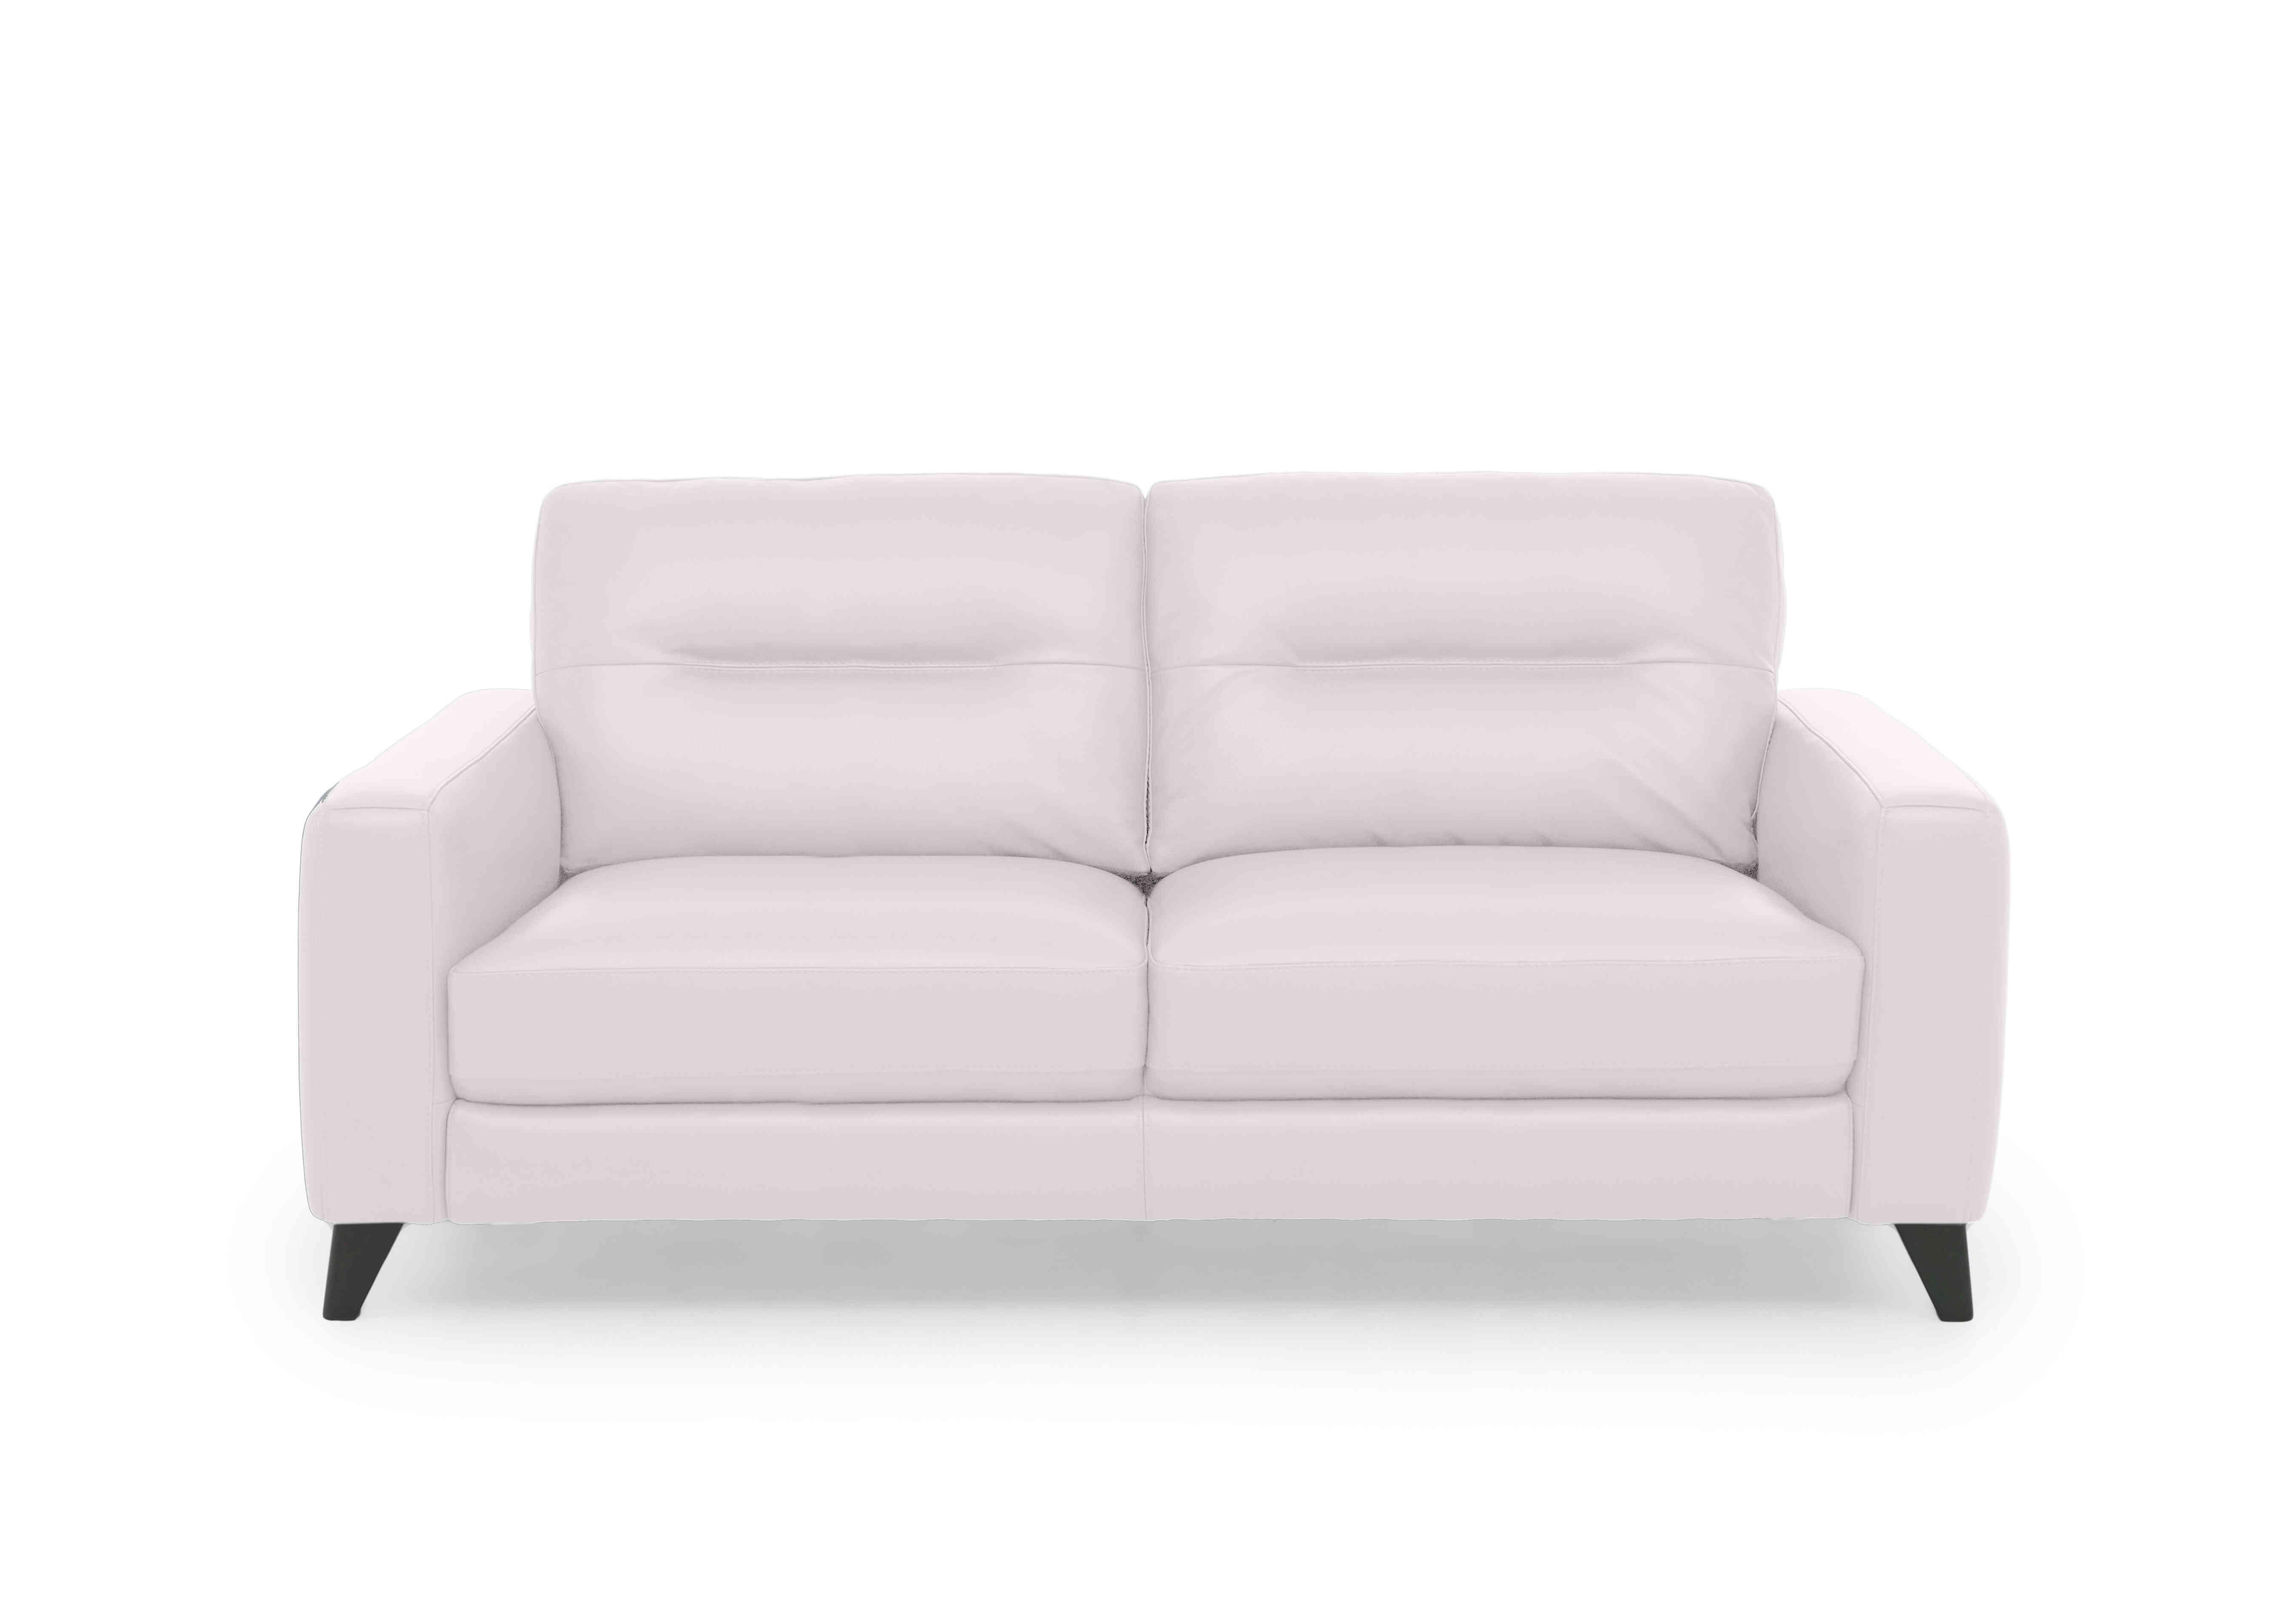 Jules 3 Seater Leather Sofa in Bv-744d Star White on Furniture Village